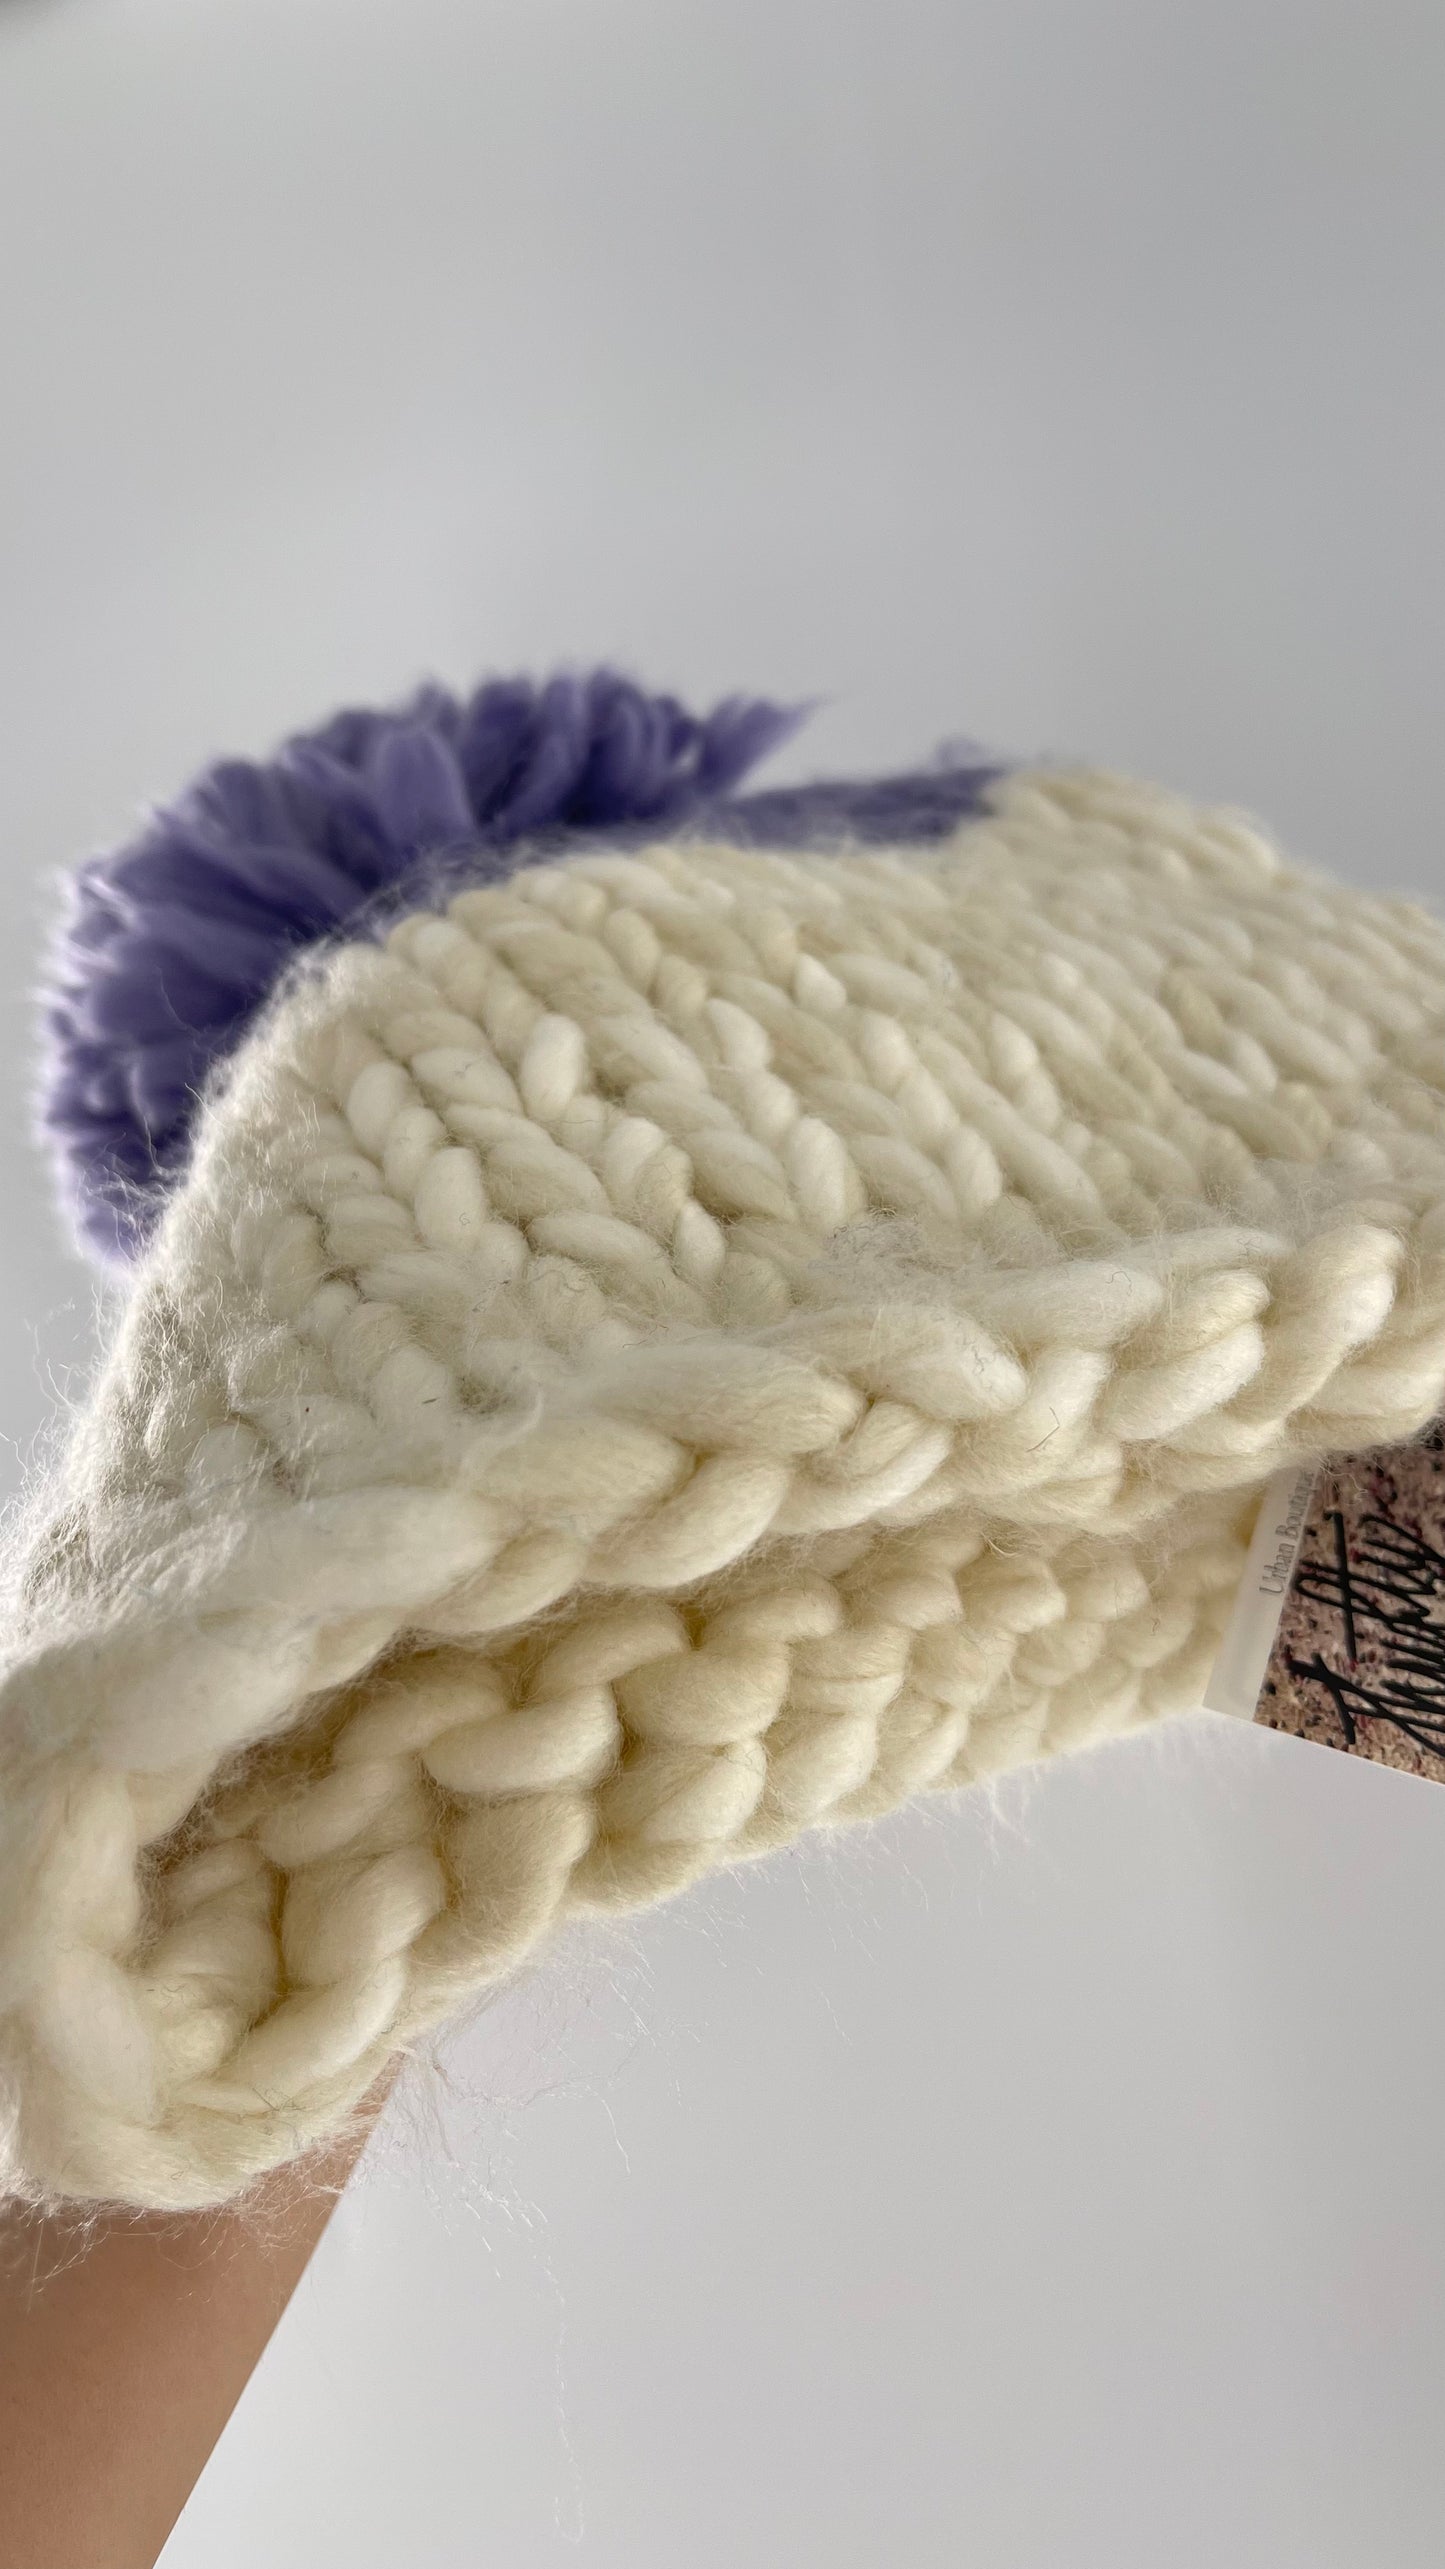 Free People White Knit Beanie with Lilac/Lavender Pom